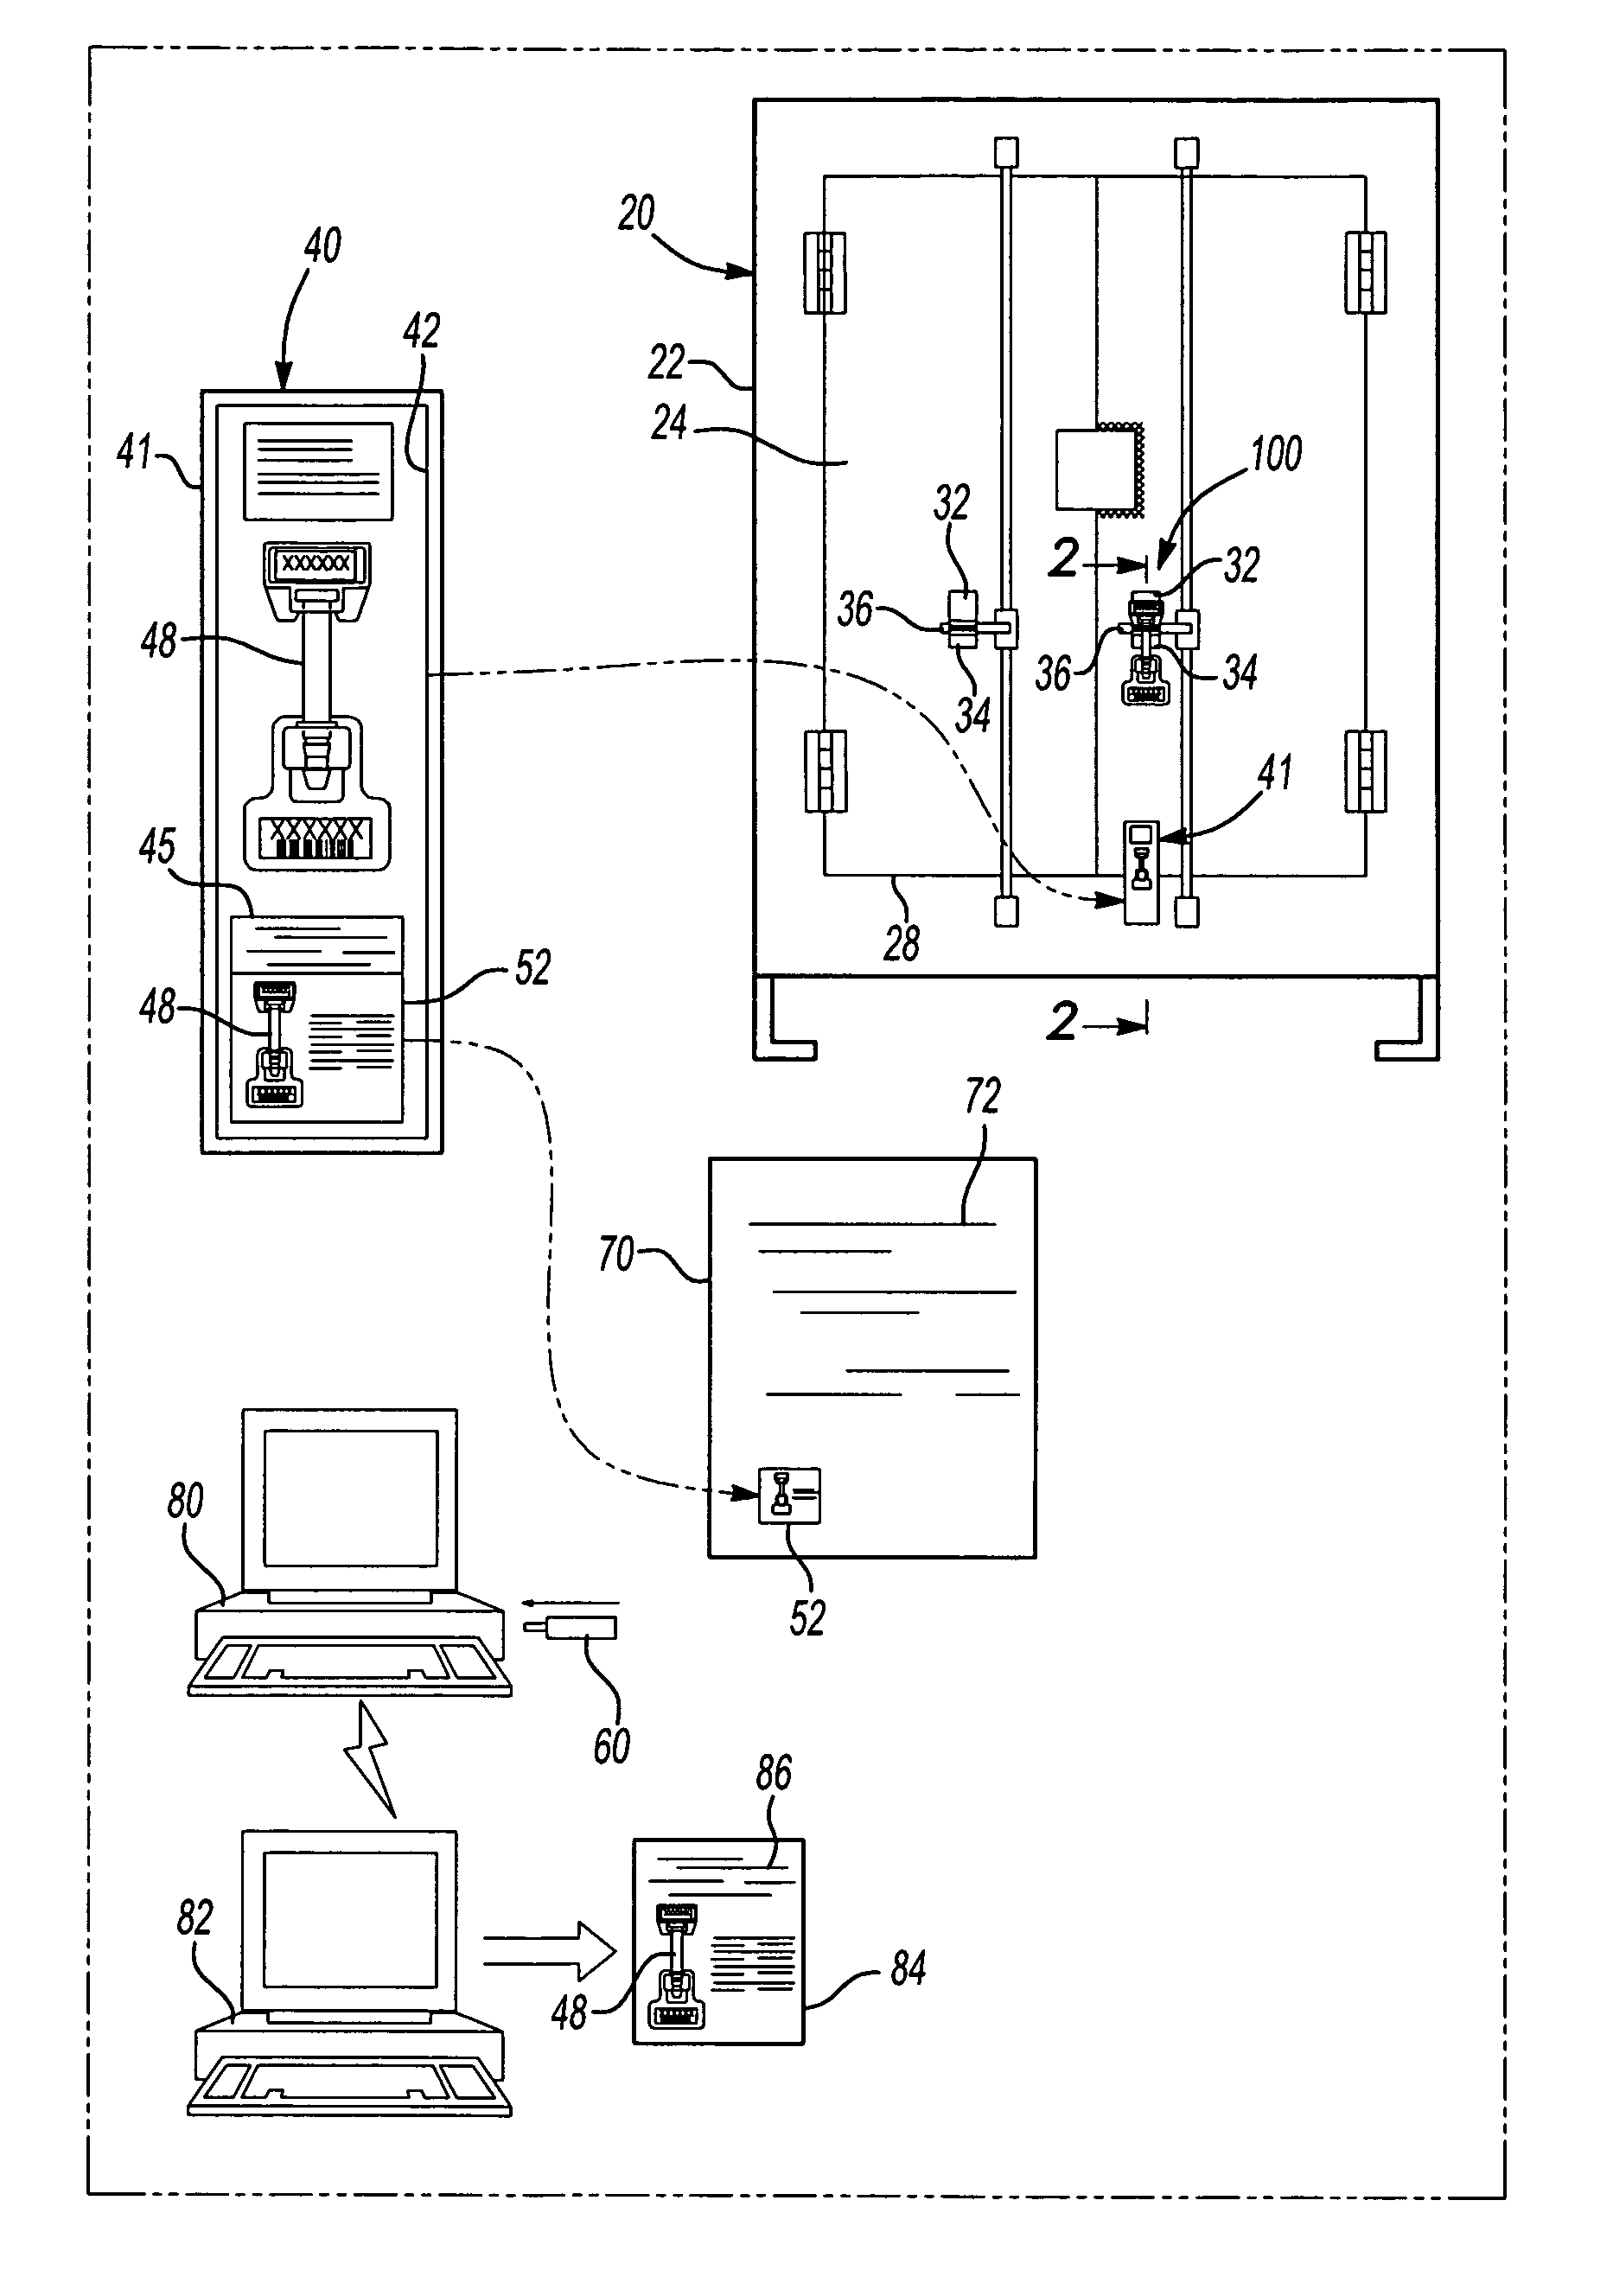 Mechanical tamper-evident high security seal and method of use to secure a cargo container